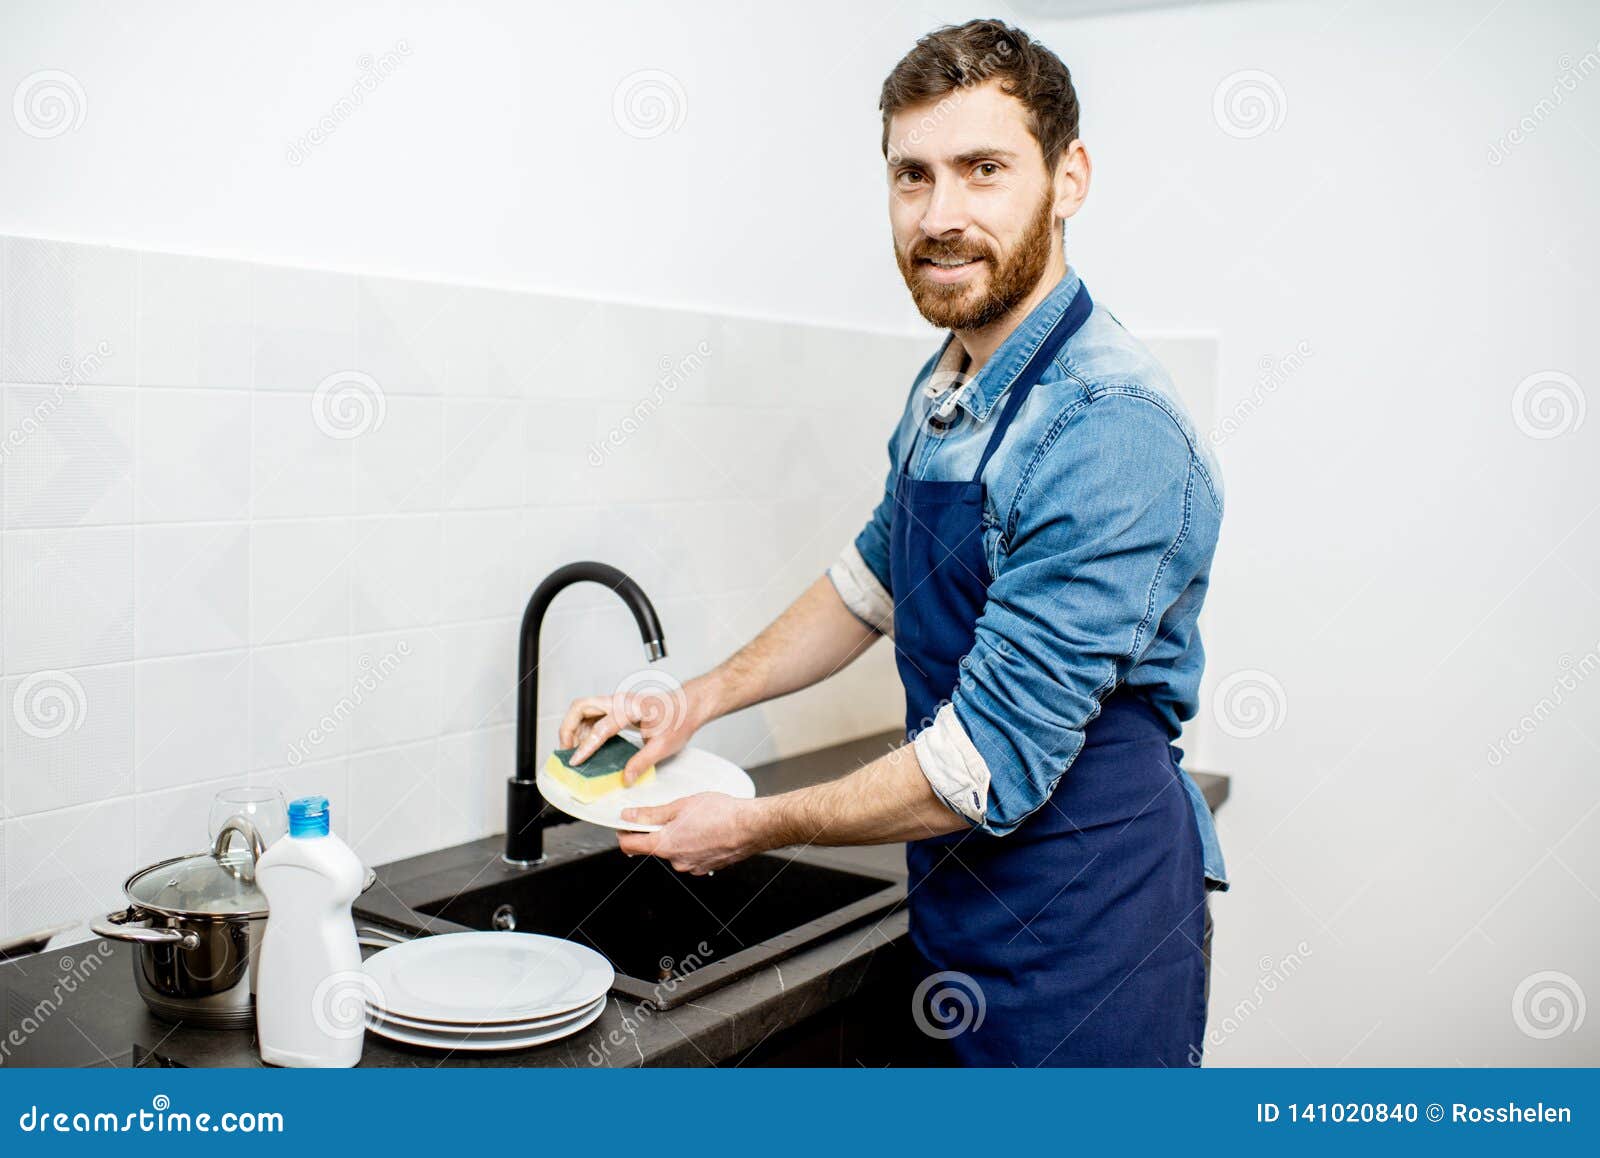 https://thumbs.dreamstime.com/z/man-washing-dishes-home-handsome-apron-doing-household-chores-kitchen-141020840.jpg